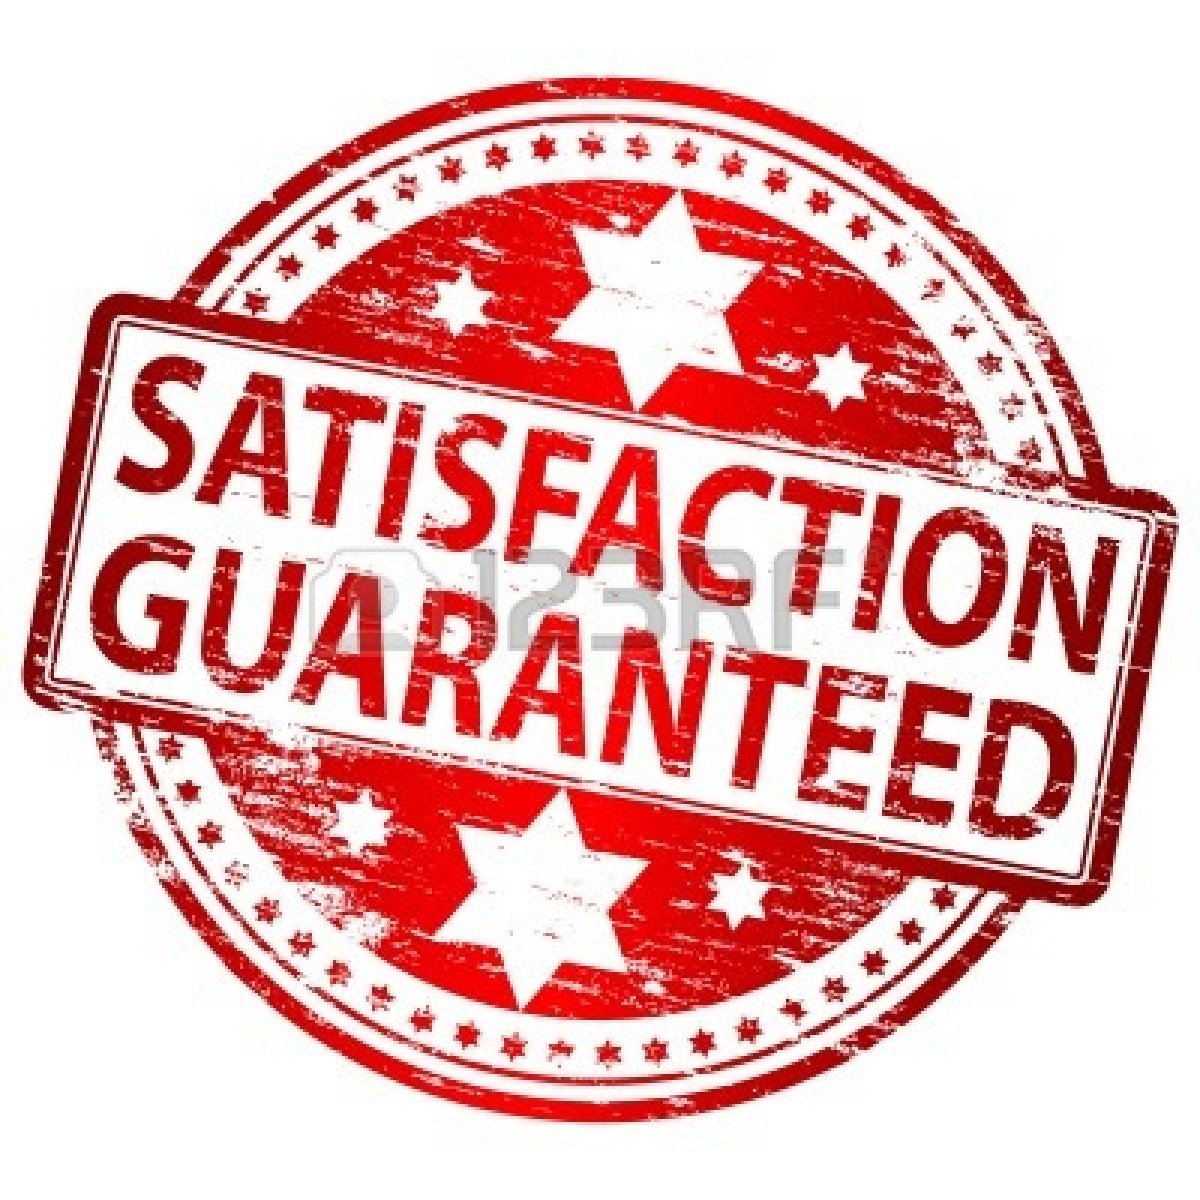 8986328 satisfaction guaranteed rubber stamp f3441f64 4ccc 46c0 b261 d906c9a1d8d4